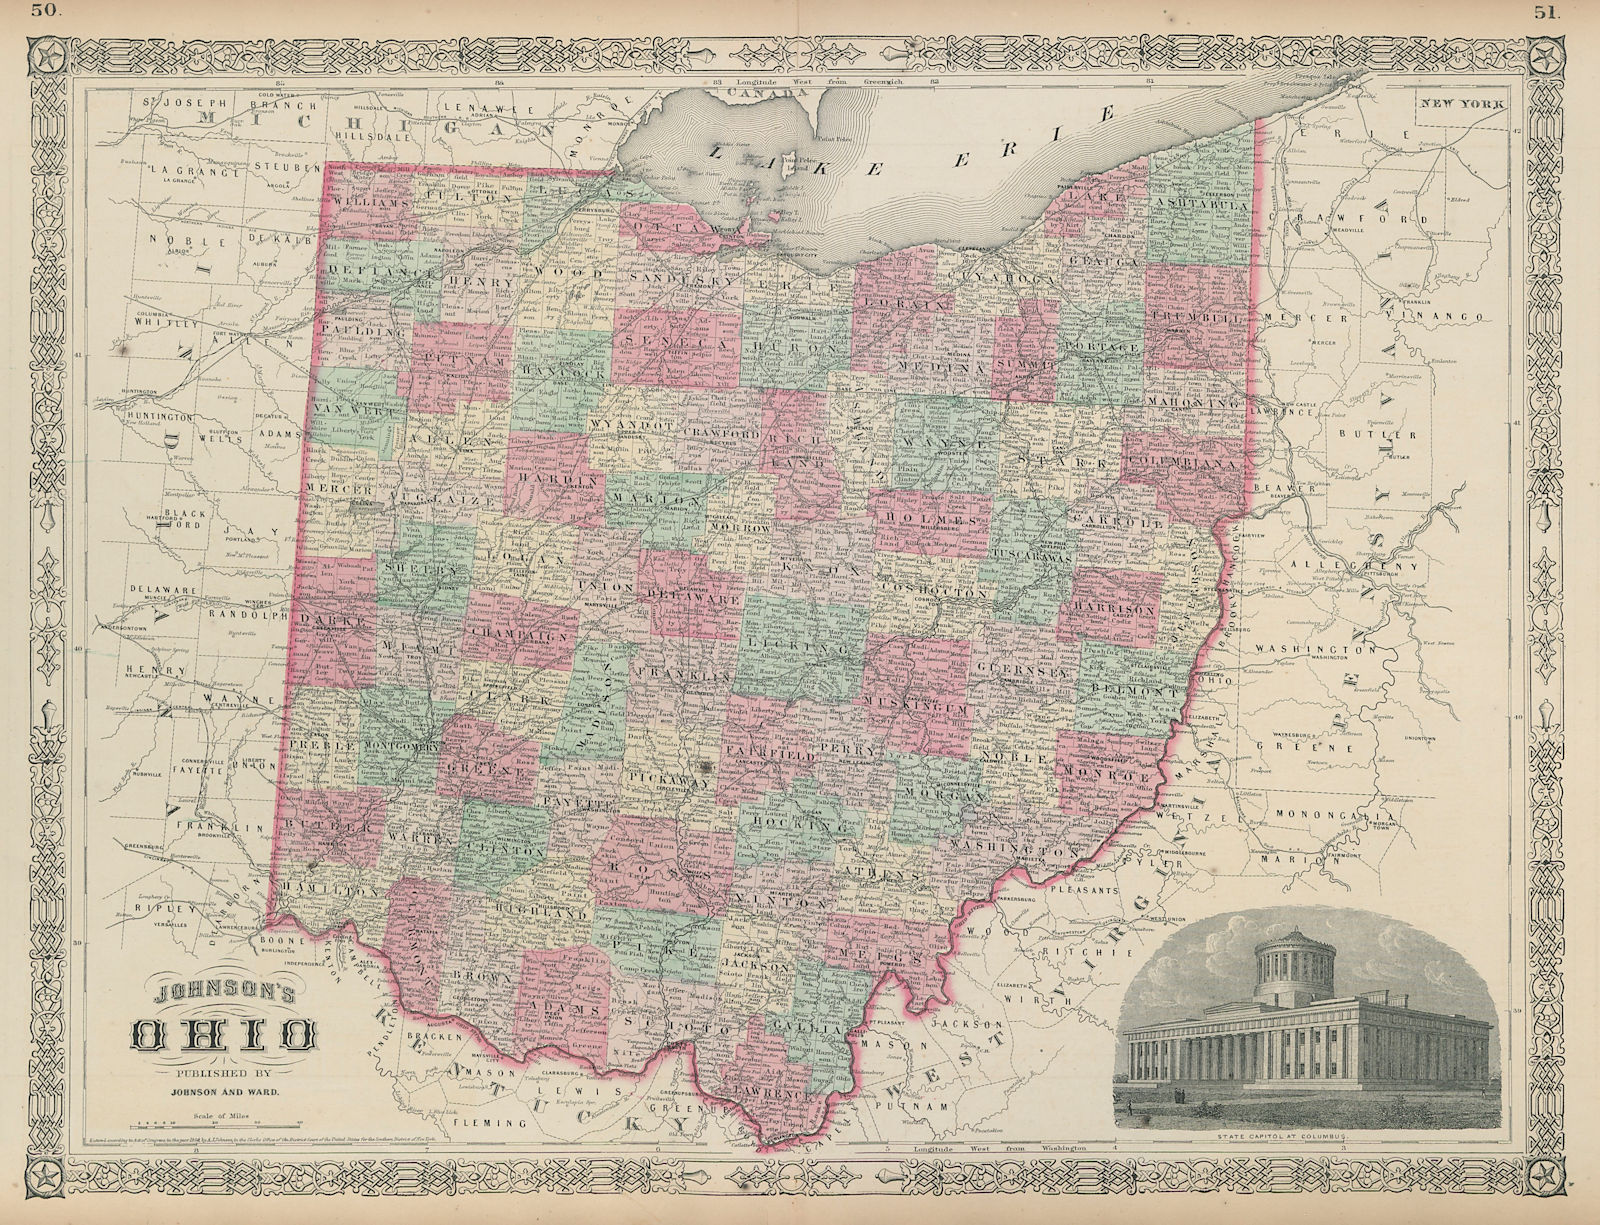 Associate Product Johnson's Ohio. US state map showing counties 1865 old antique plan chart